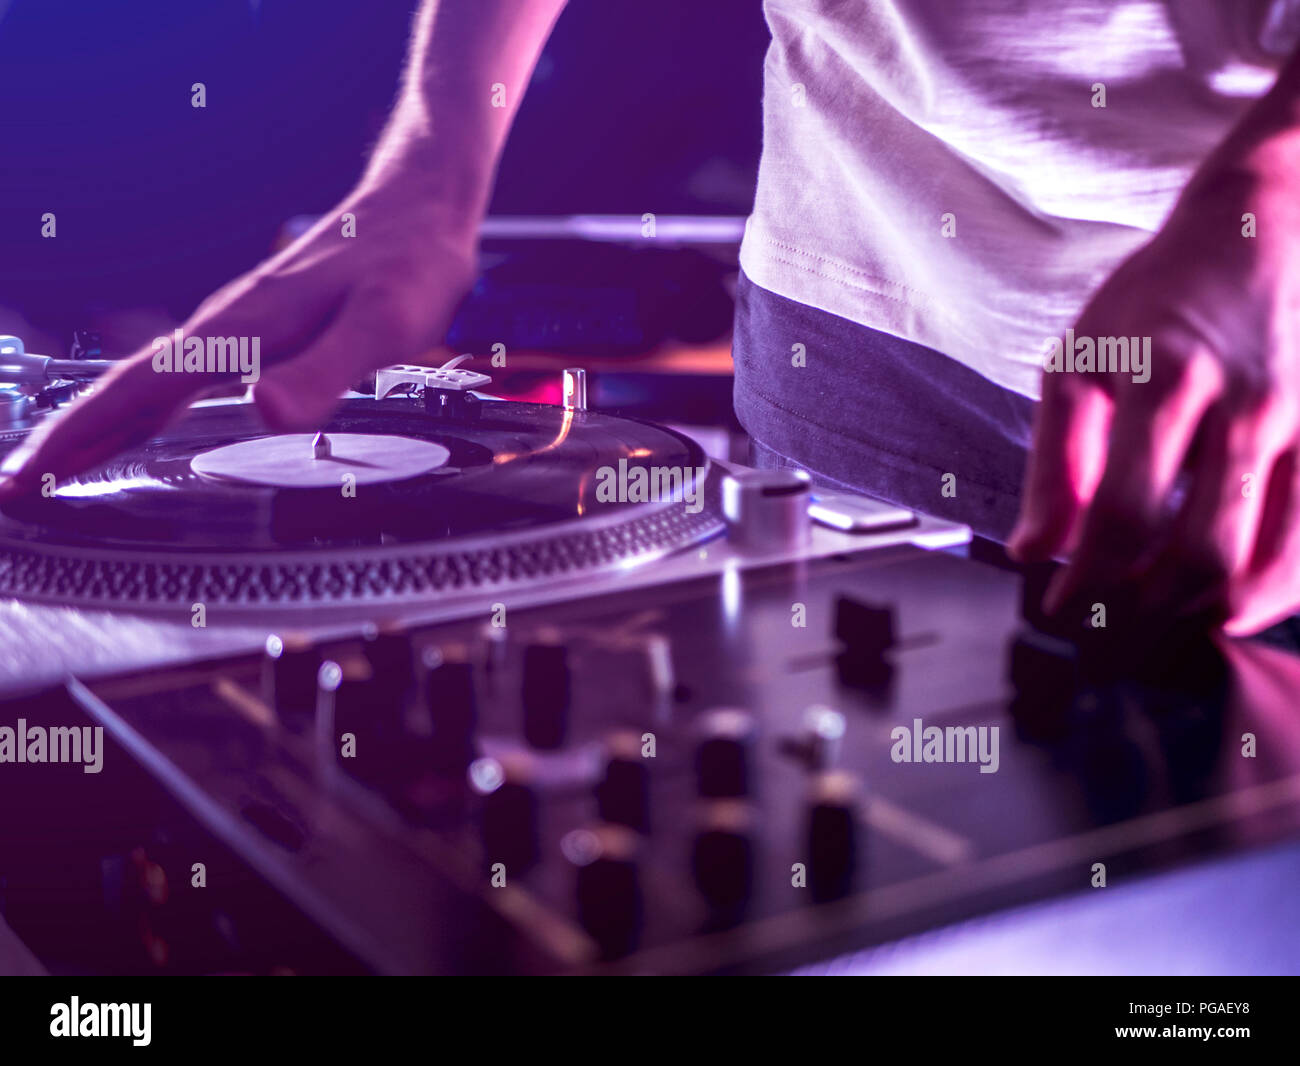 Close Up Dj Hand Play Music On Turntable Record Setup At Home Party Tomed Vintage Look Stock Photo Alamy